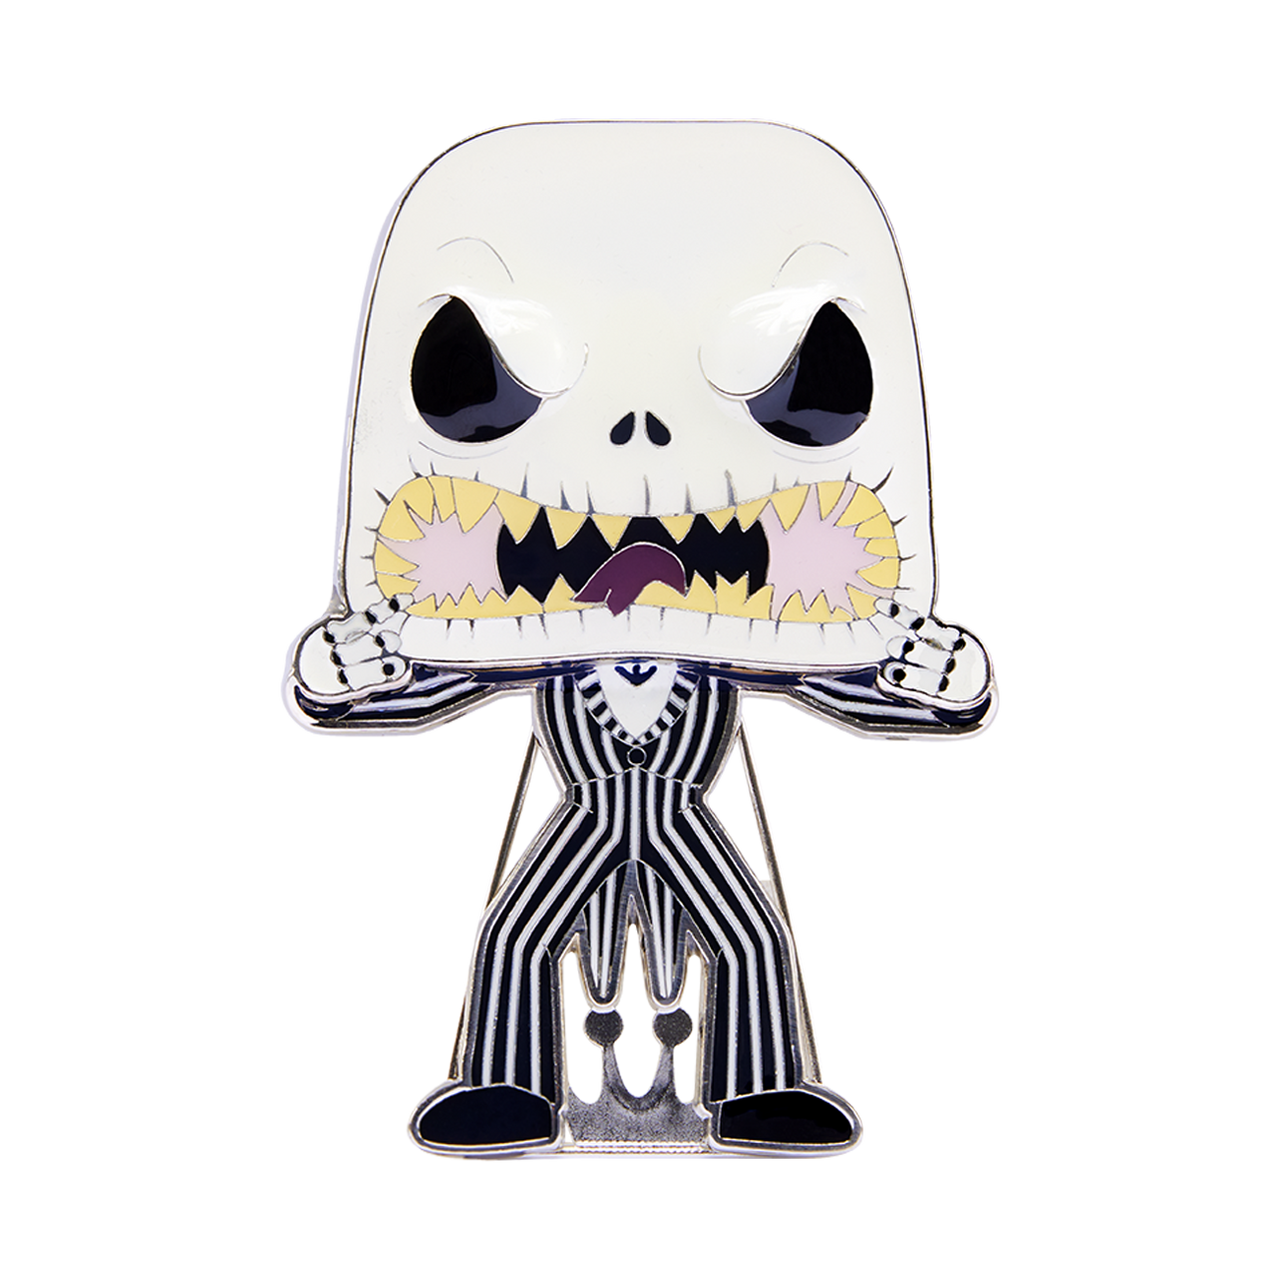 The Nightmare Before Christmas: Scary Face Jack Funko Pop! Pin